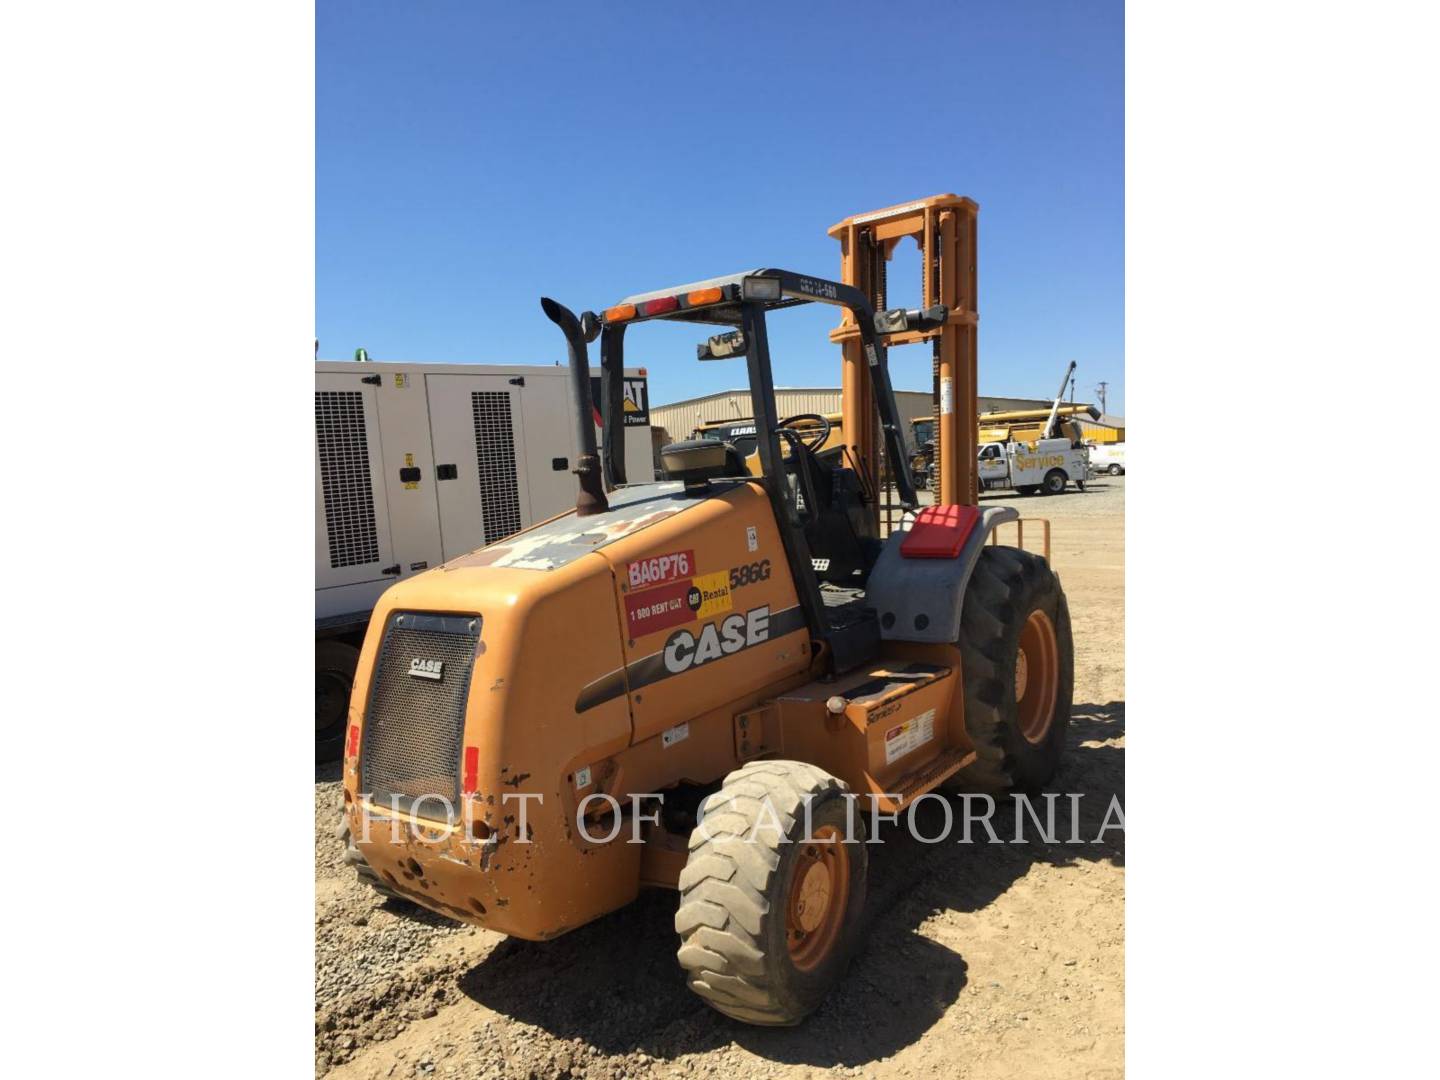 2012 Case 586g Case Forklift For Sale In Stockton Ca Ironsearch